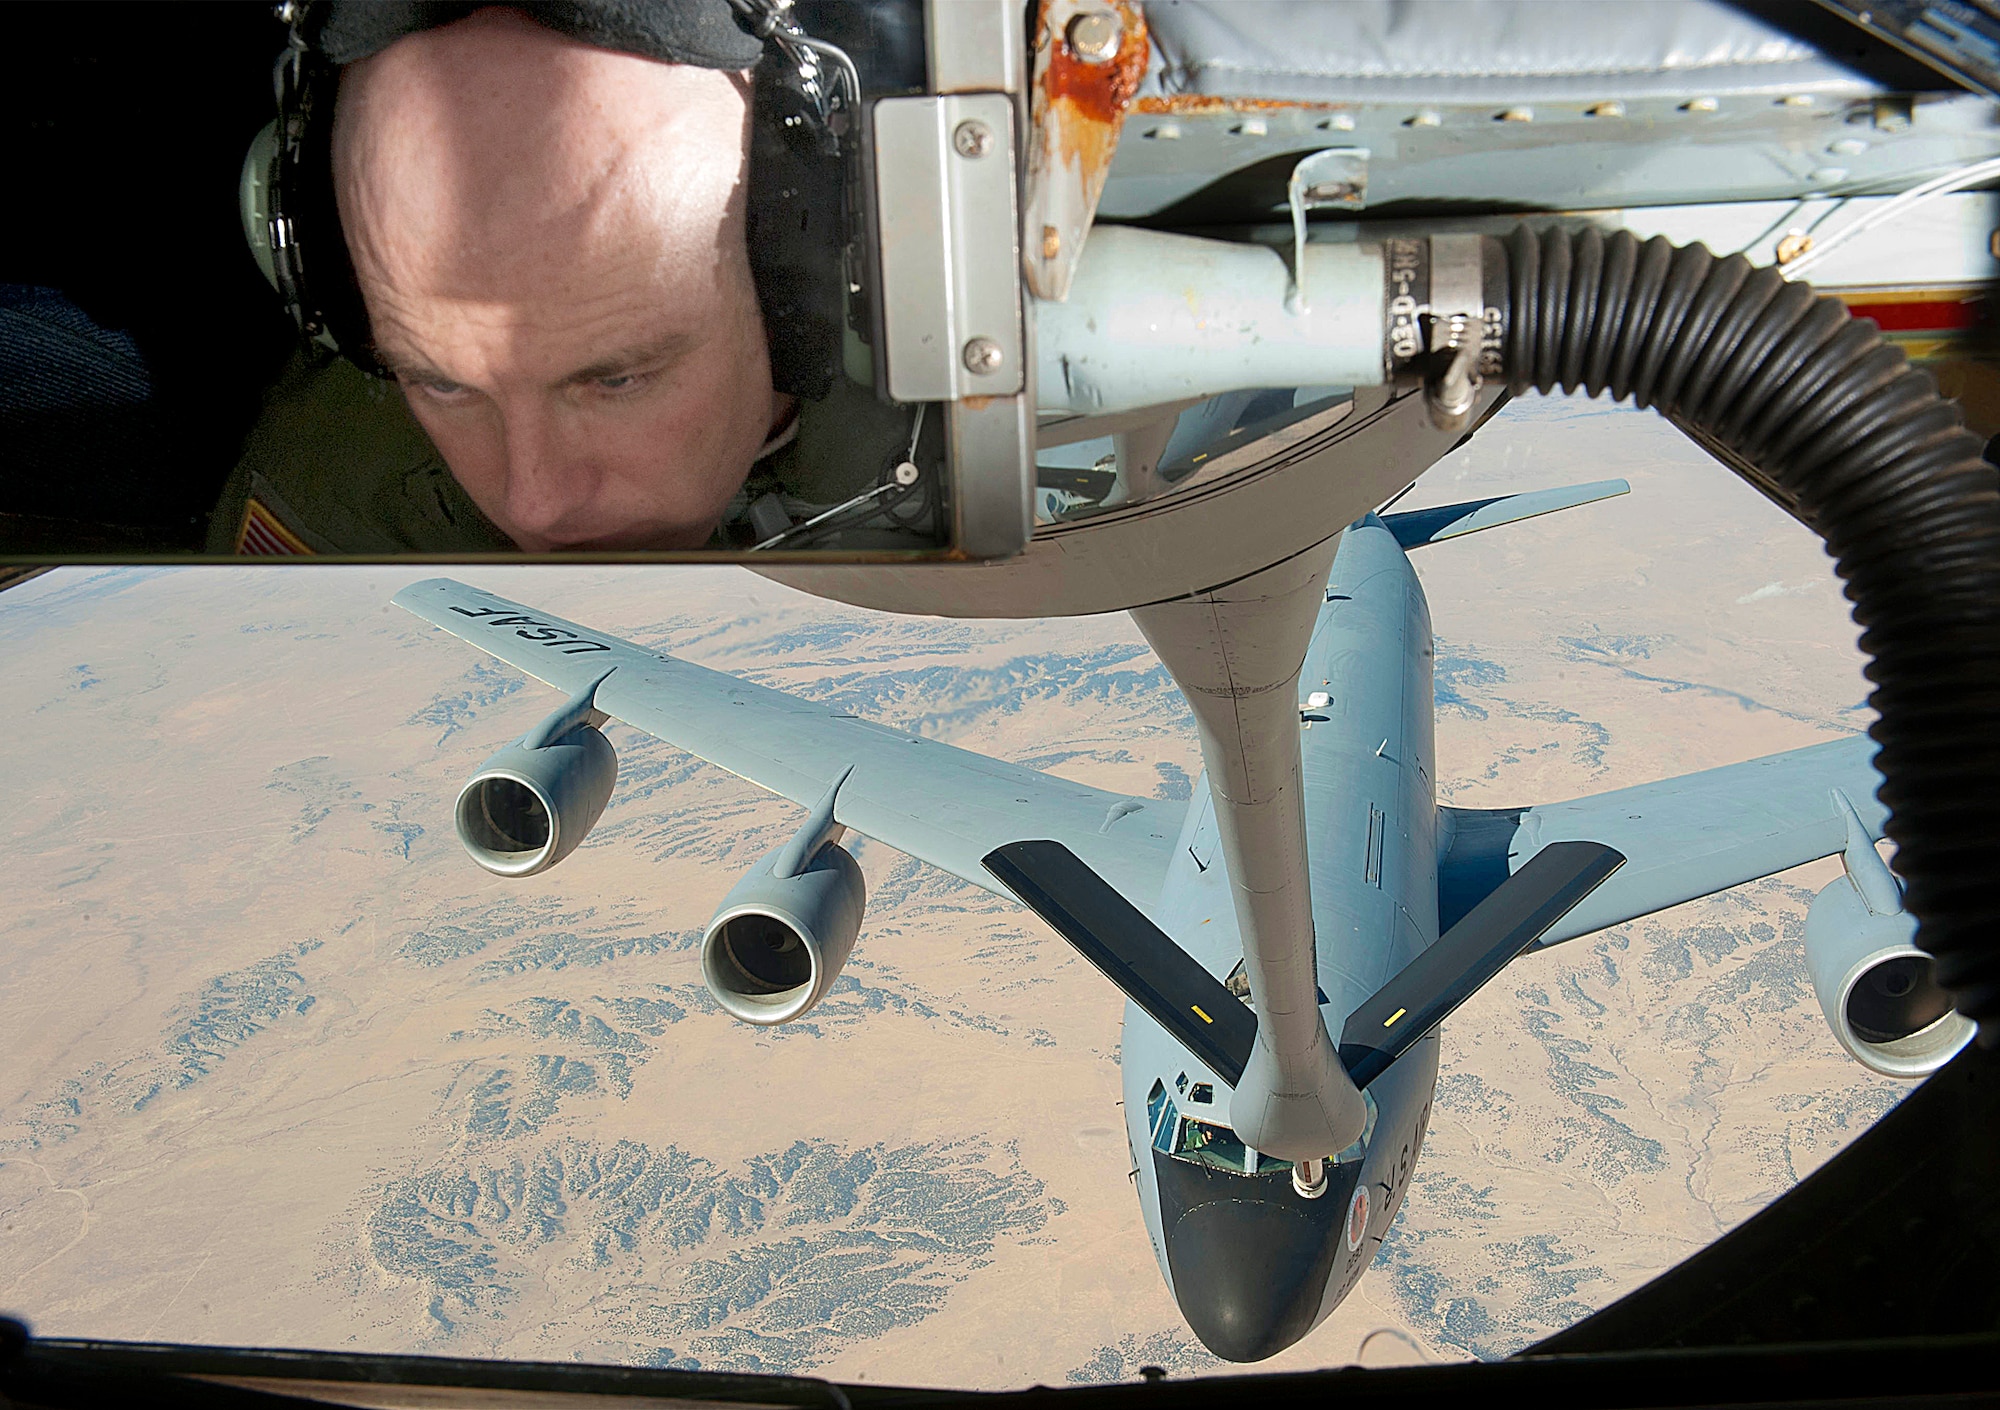 Senior Master Sgt. Ray Lewis, a refueling boom operator assigned to the Air Force Reserve 18th Air Refueling Squadron, prepares to refuel a KC-135 Stratotanker during a local training mission flown from McConnell Air Force Base, Kan., Sept. 26, 2012.  The sortie was the final local mission for the Air Force Reserve 931st Air Refueling Group for fiscal year 2012.  During the final local mission, the 931st achieved its target of flying 3,688 hours for the fiscal year.  (U.S. Air Force photo by Airman 1st Class Maurice A. Hodges)